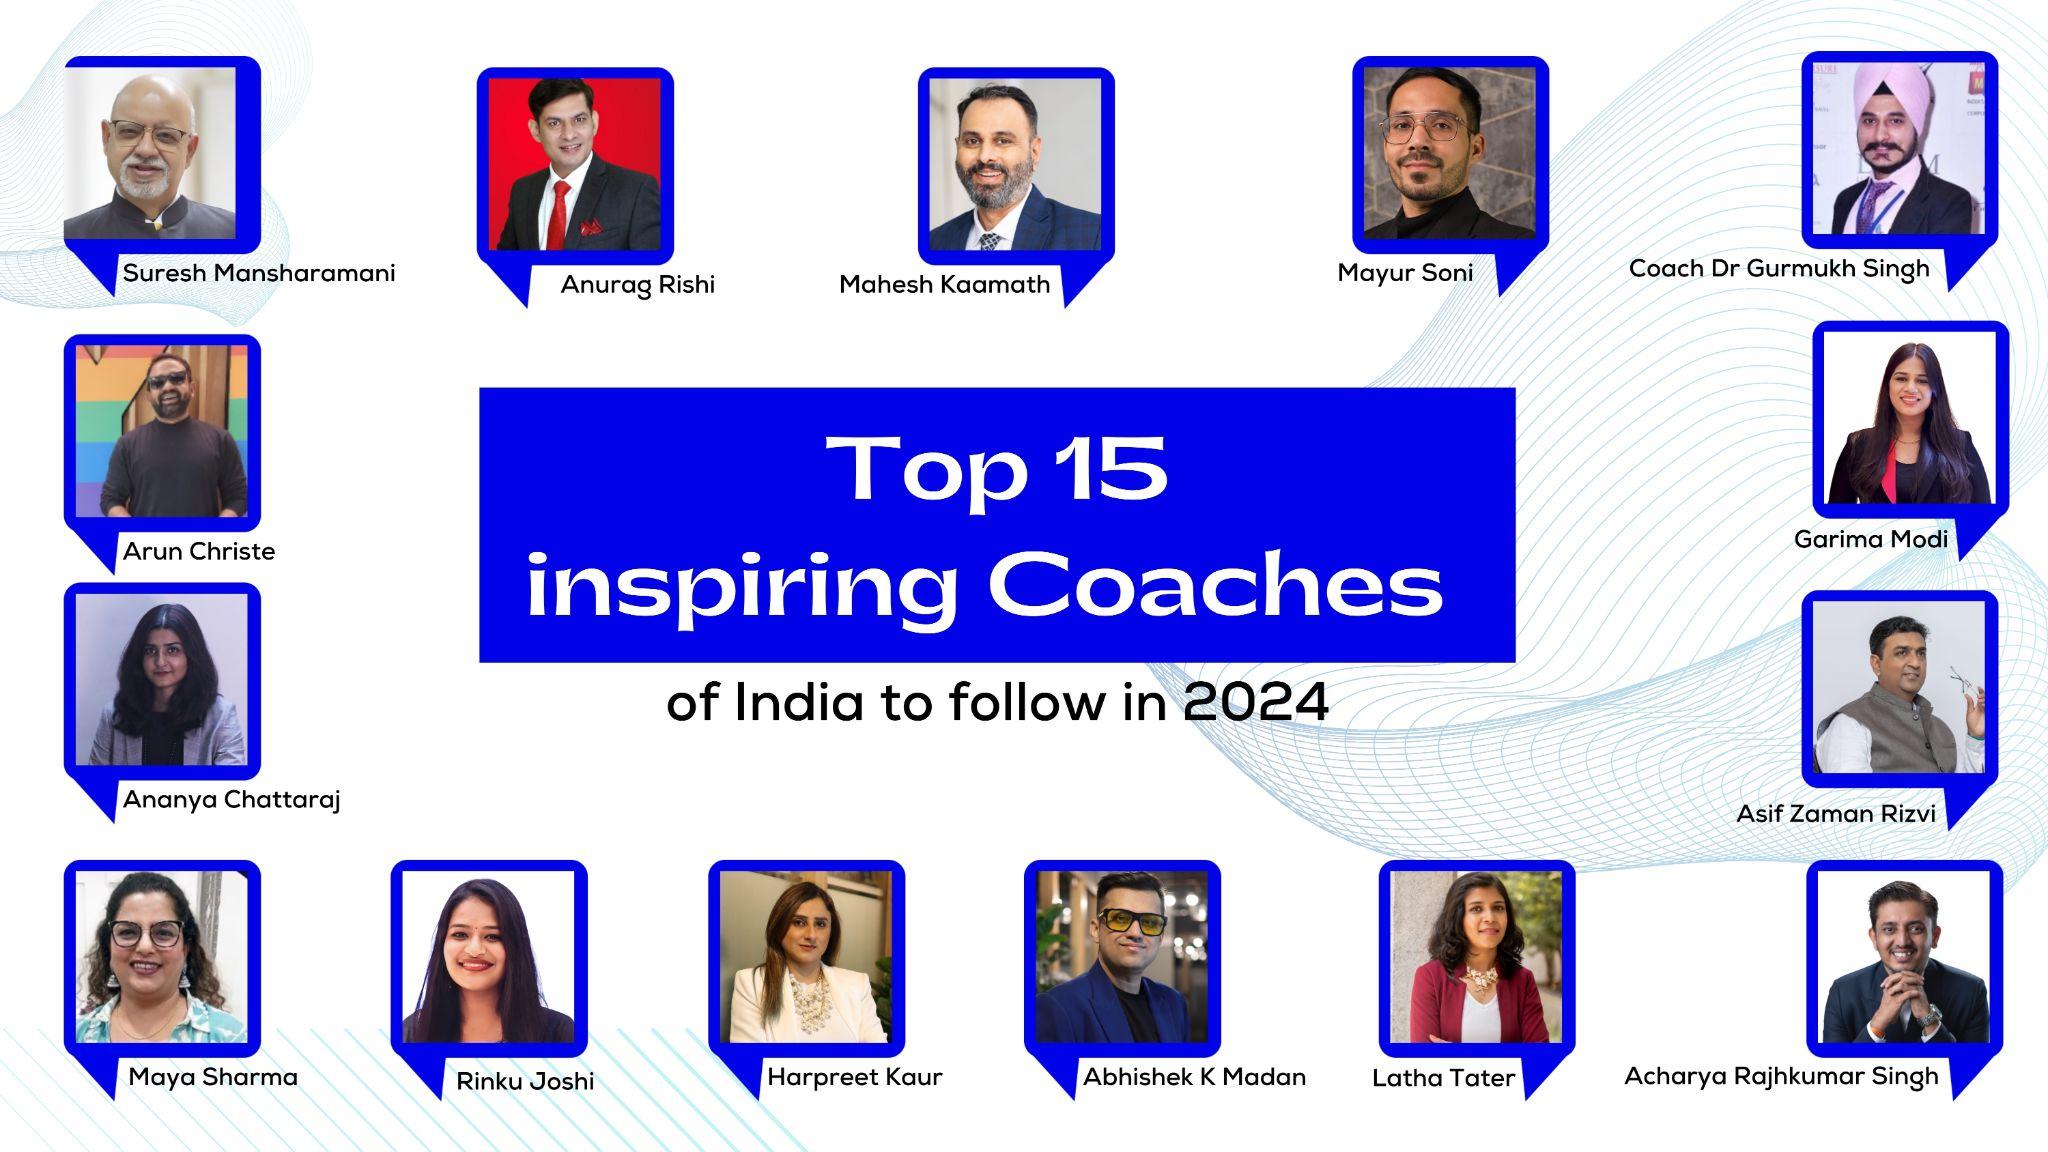 Top 15 inspiring Coaches of India to follow in 2024